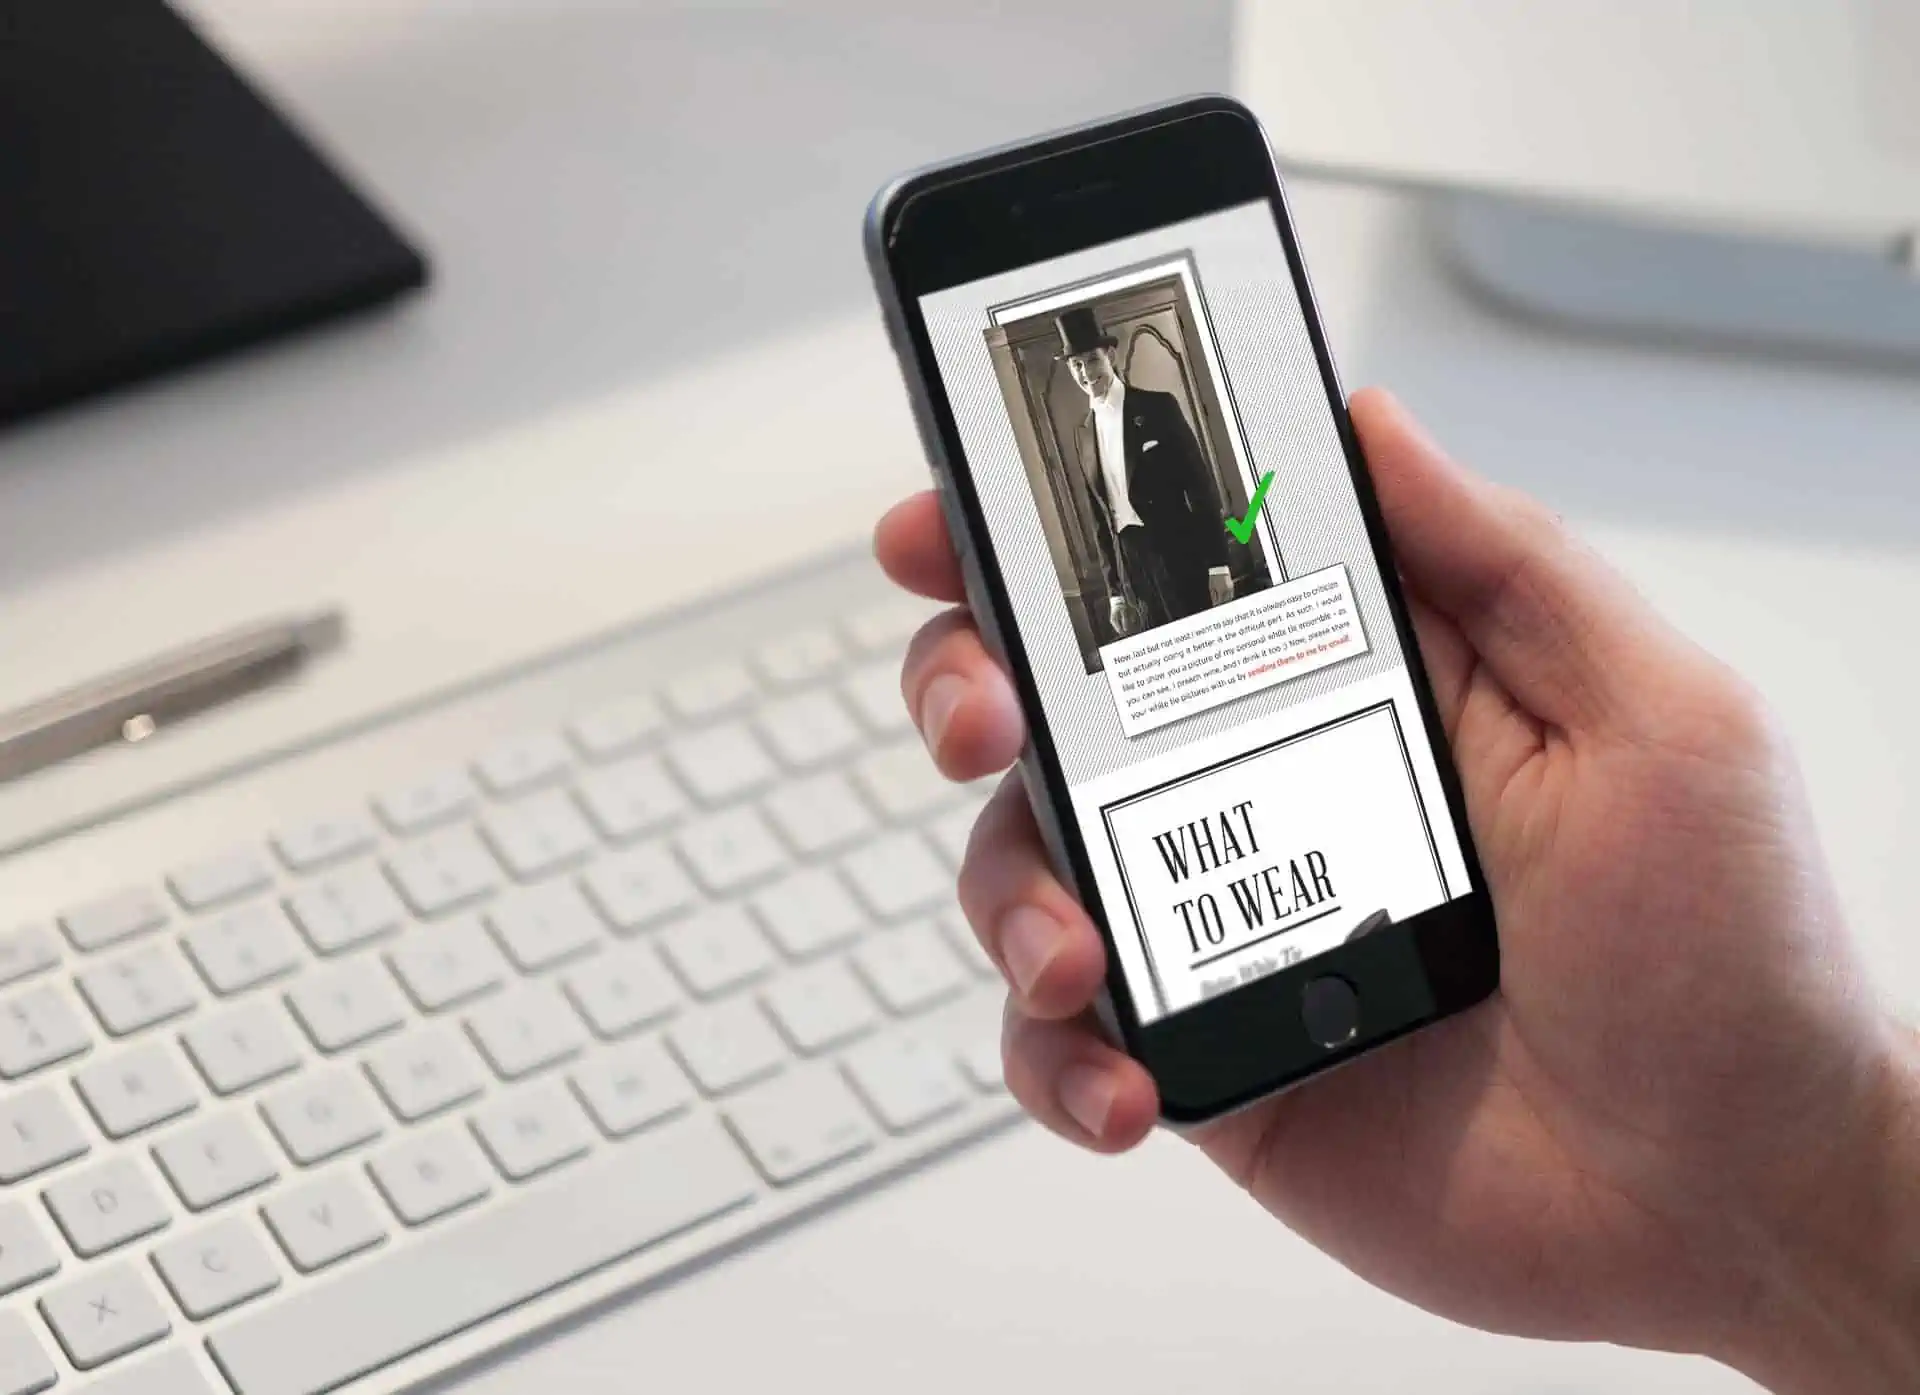 A photograph of a phone depicting the white tie guide ebook